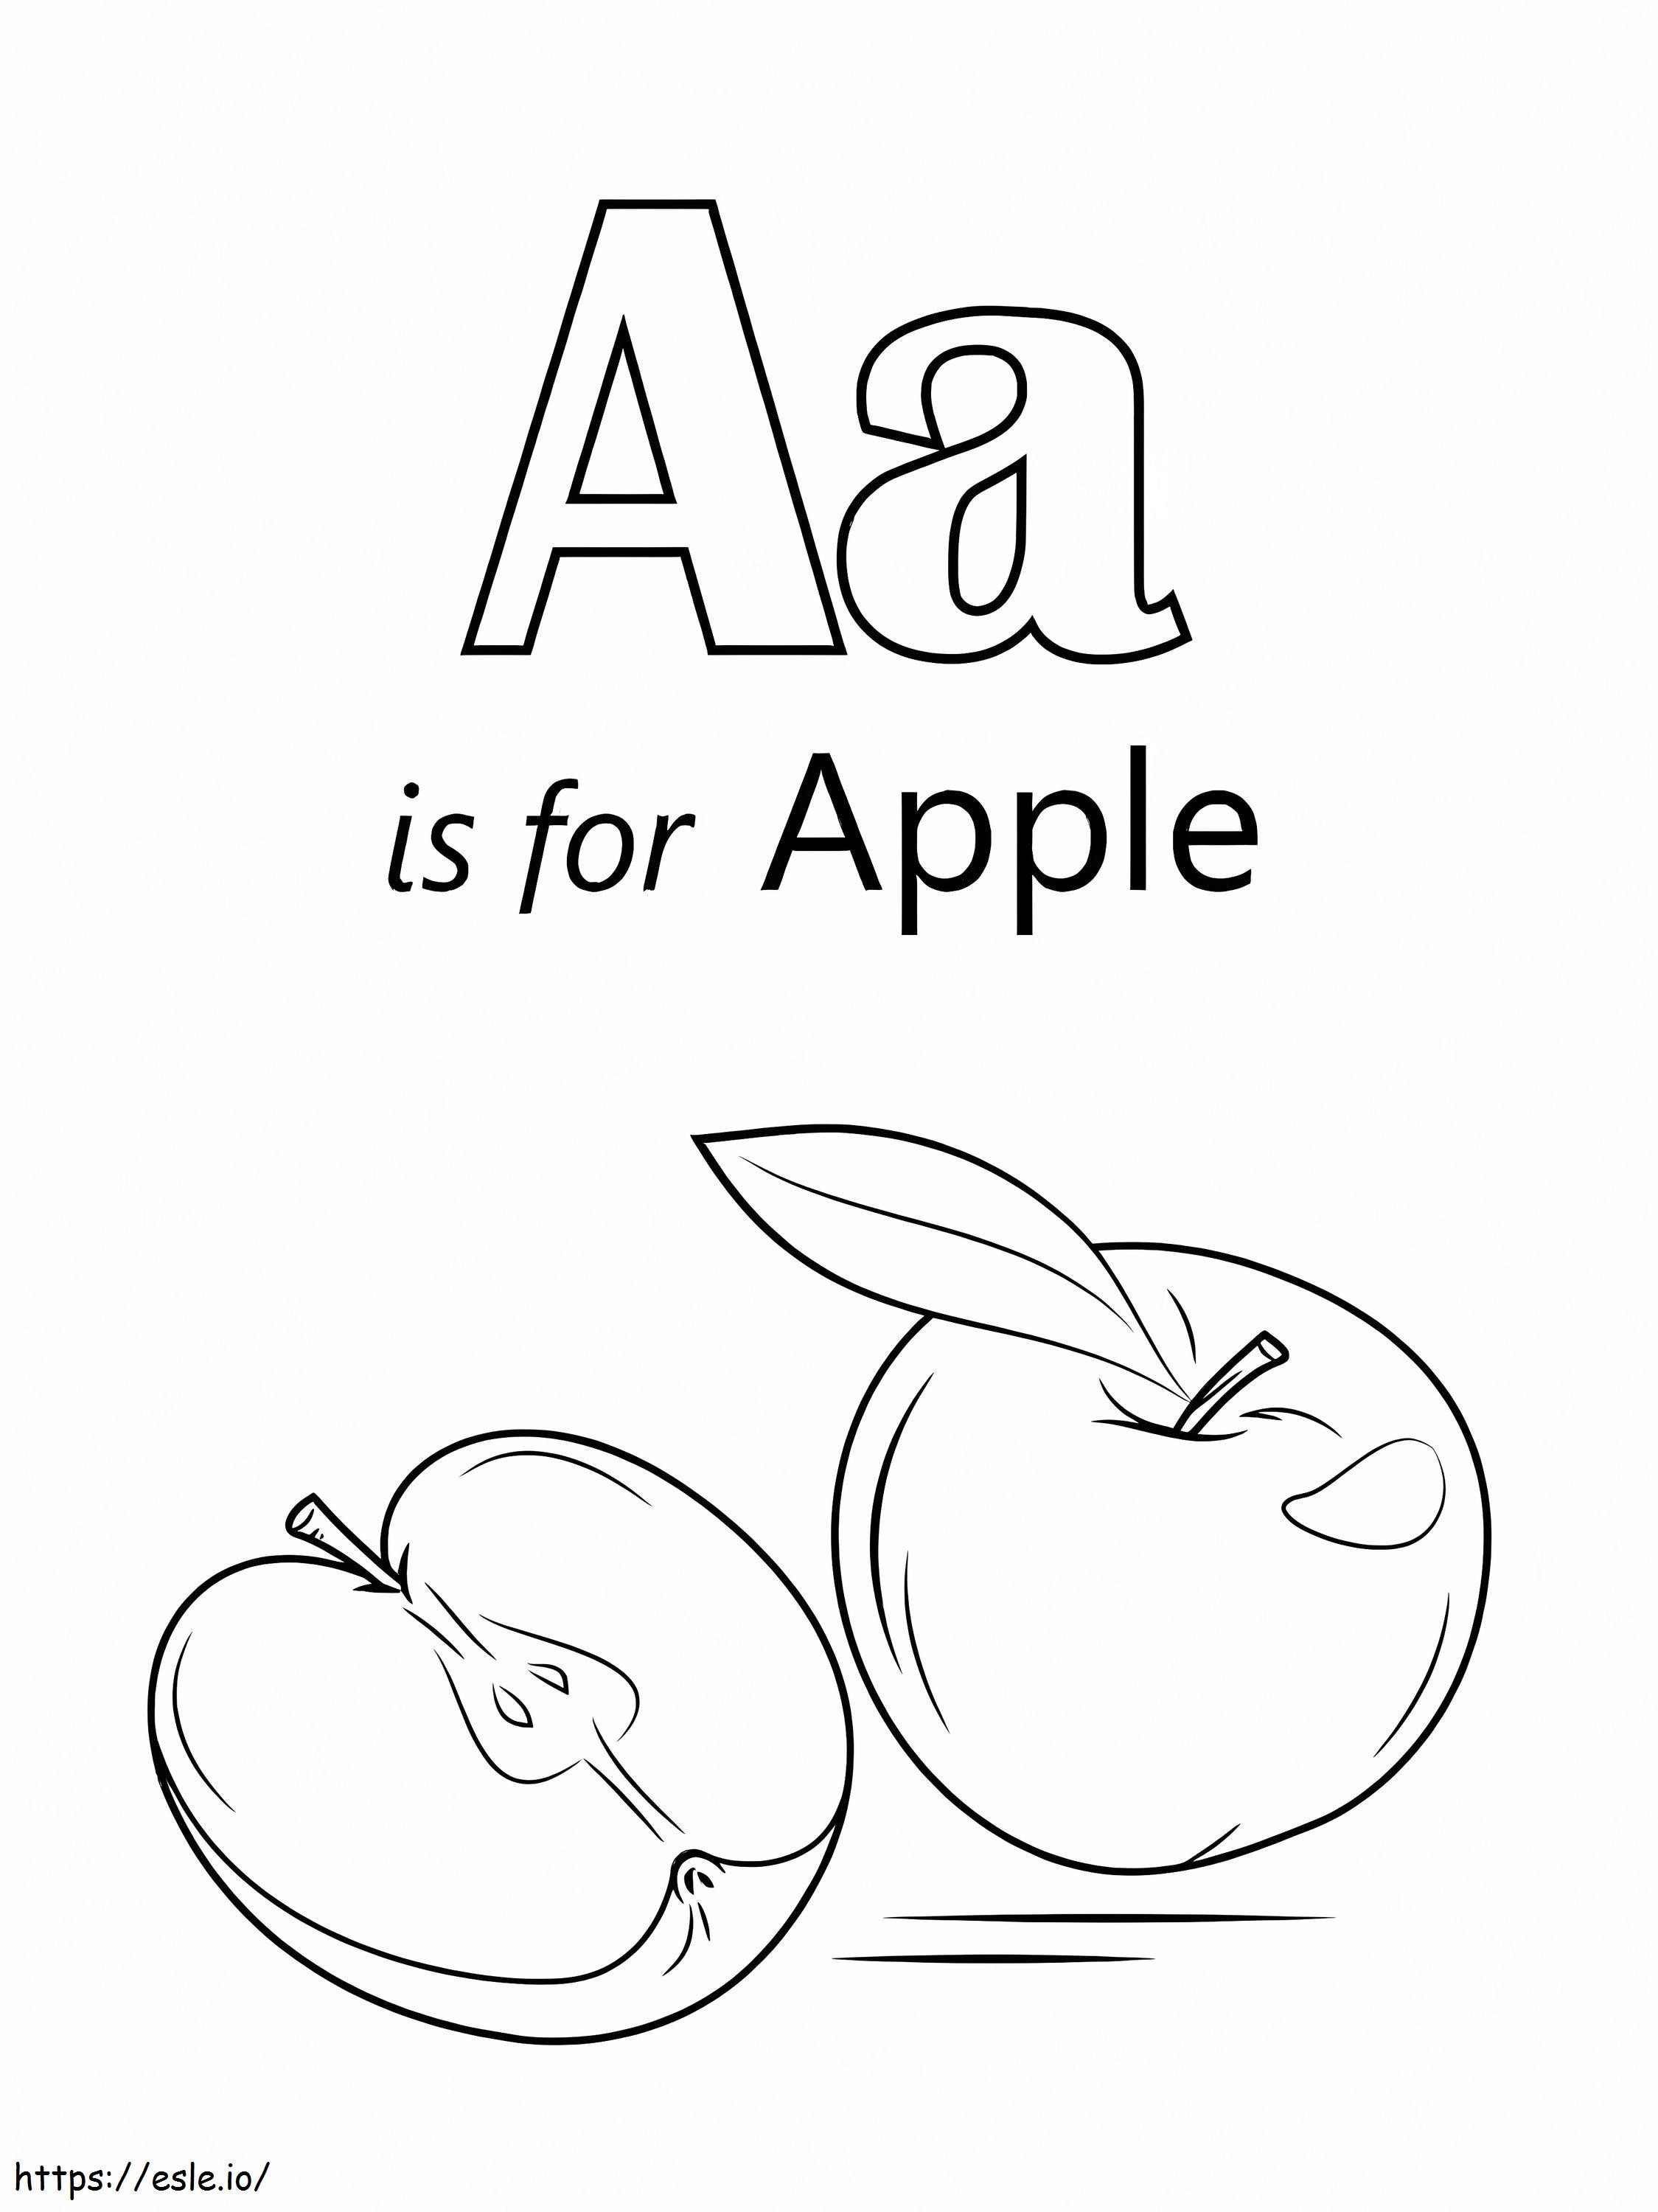 Apple Letter A coloring page